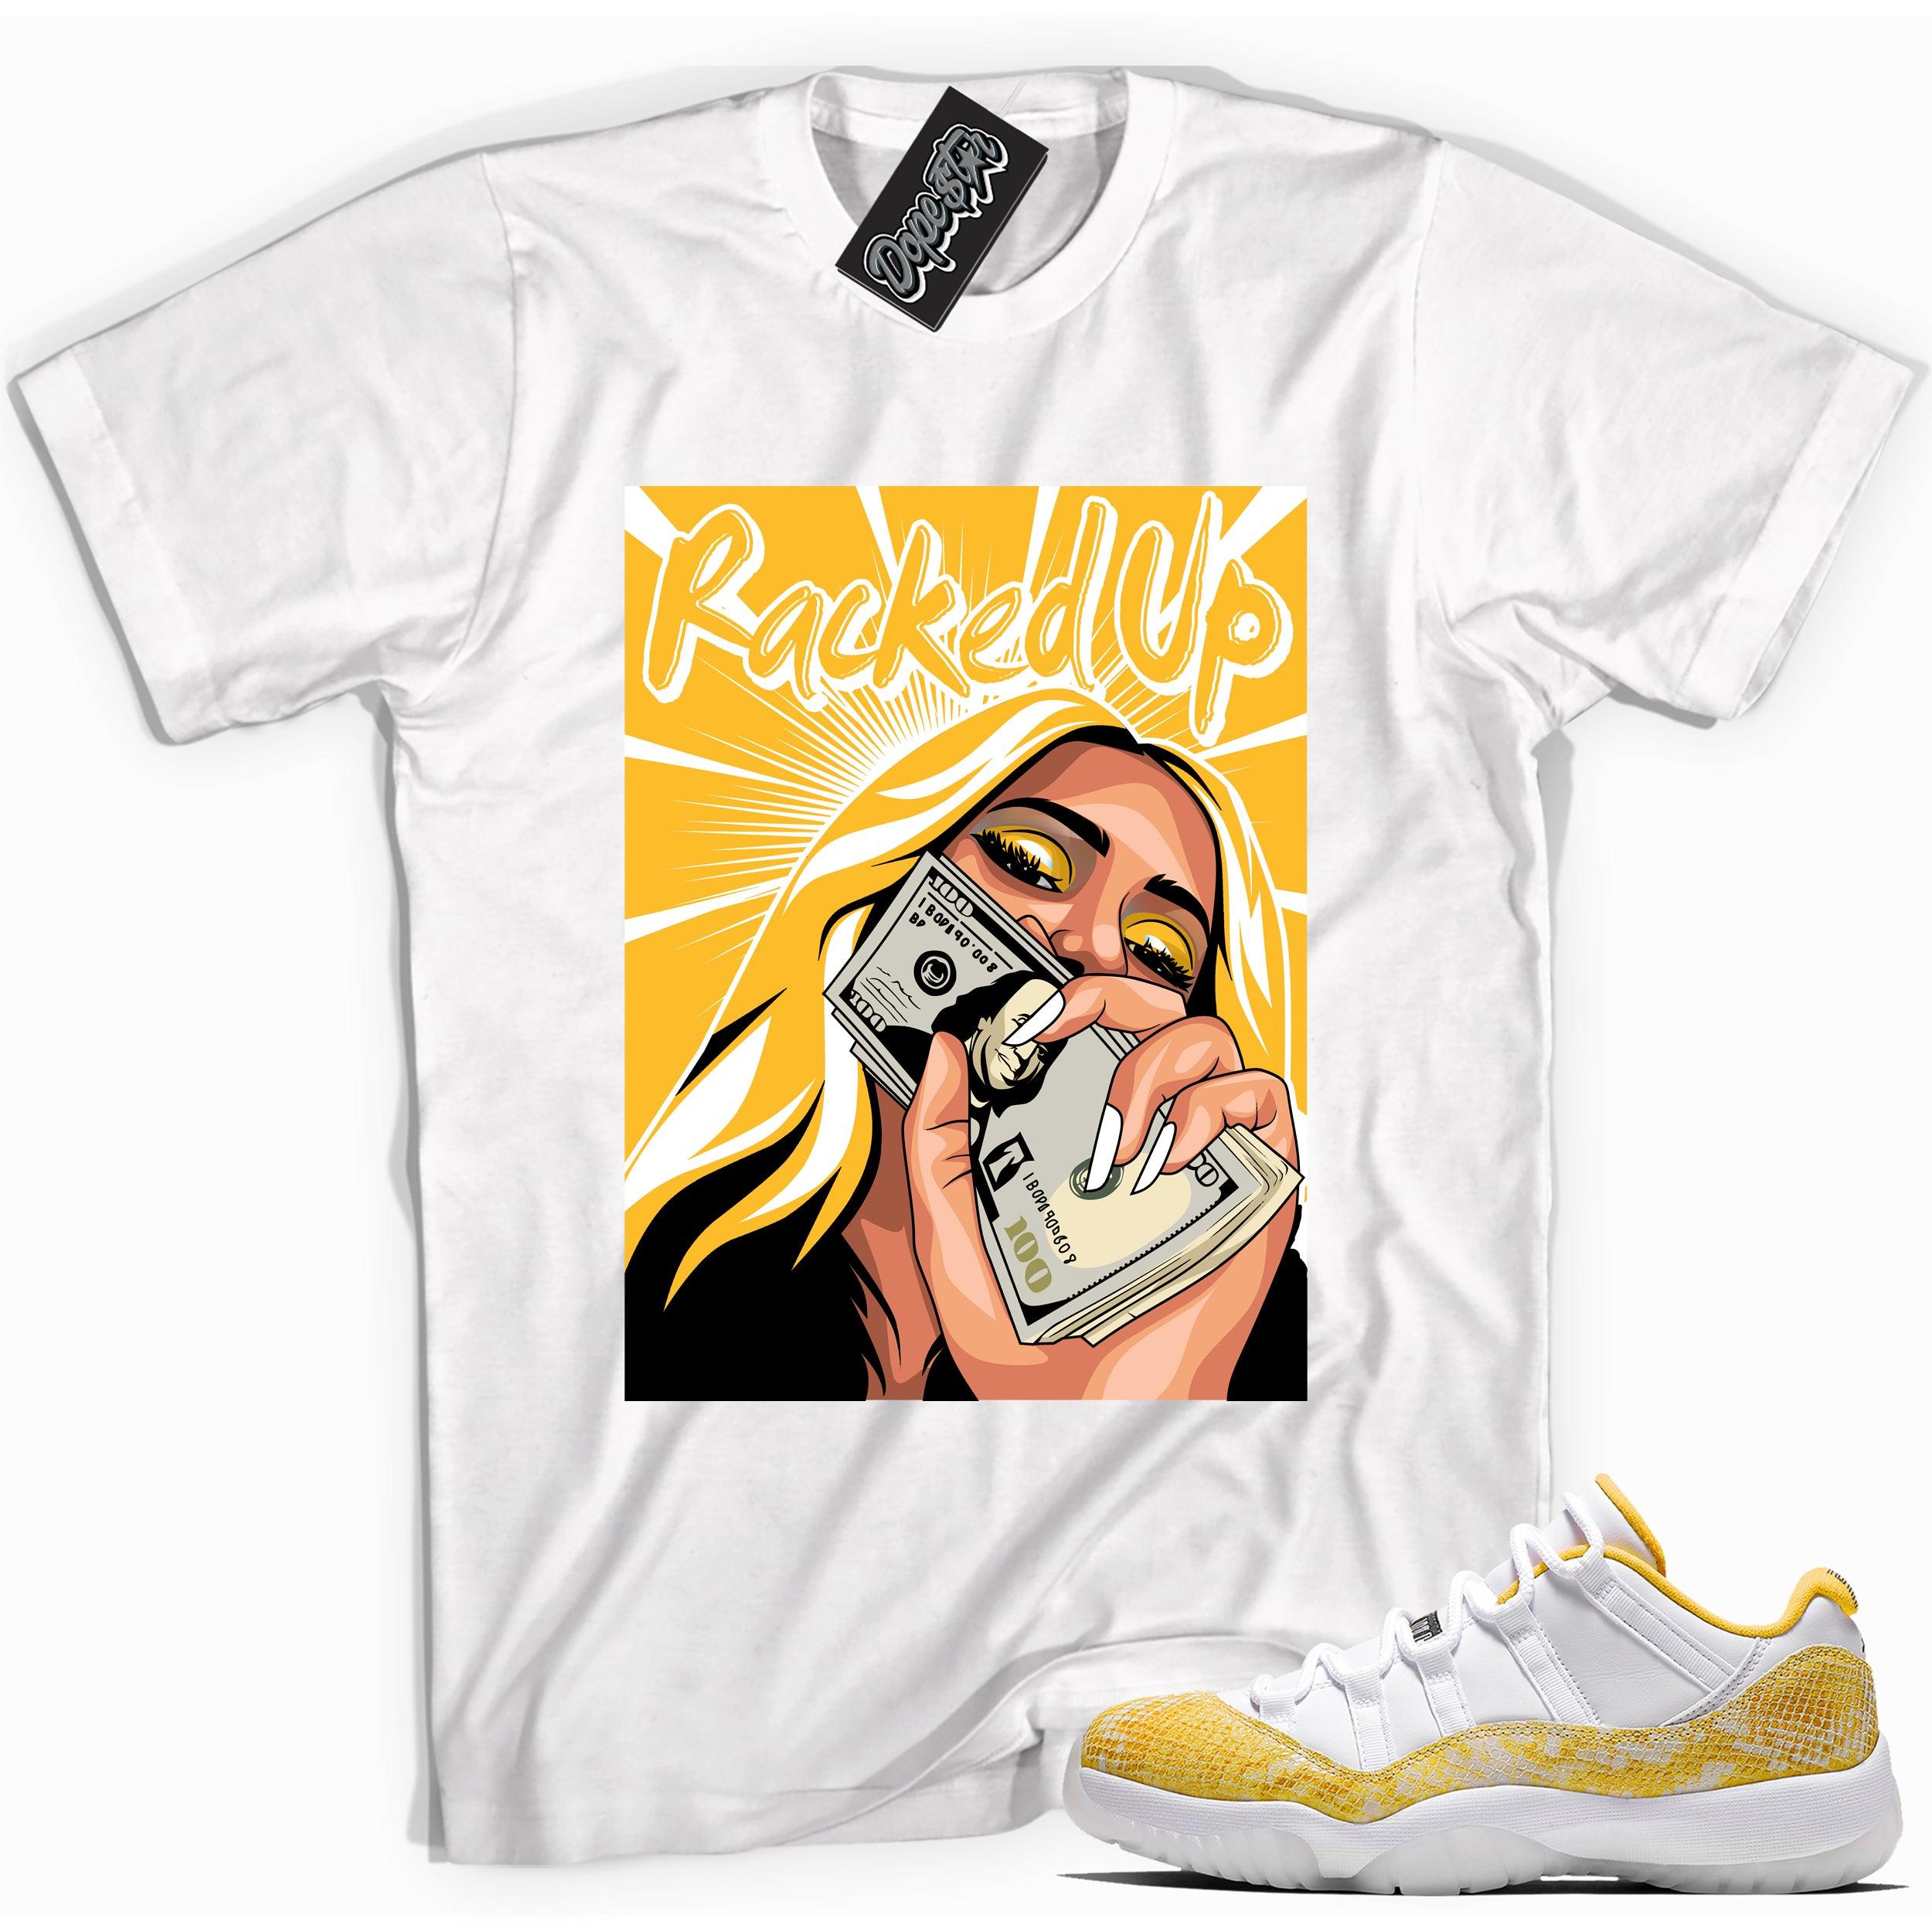 Cool white graphic tee with 'racked up' print, that perfectly matches Air Jordan 11 Retro Low Yellow Snakeskin sneakers